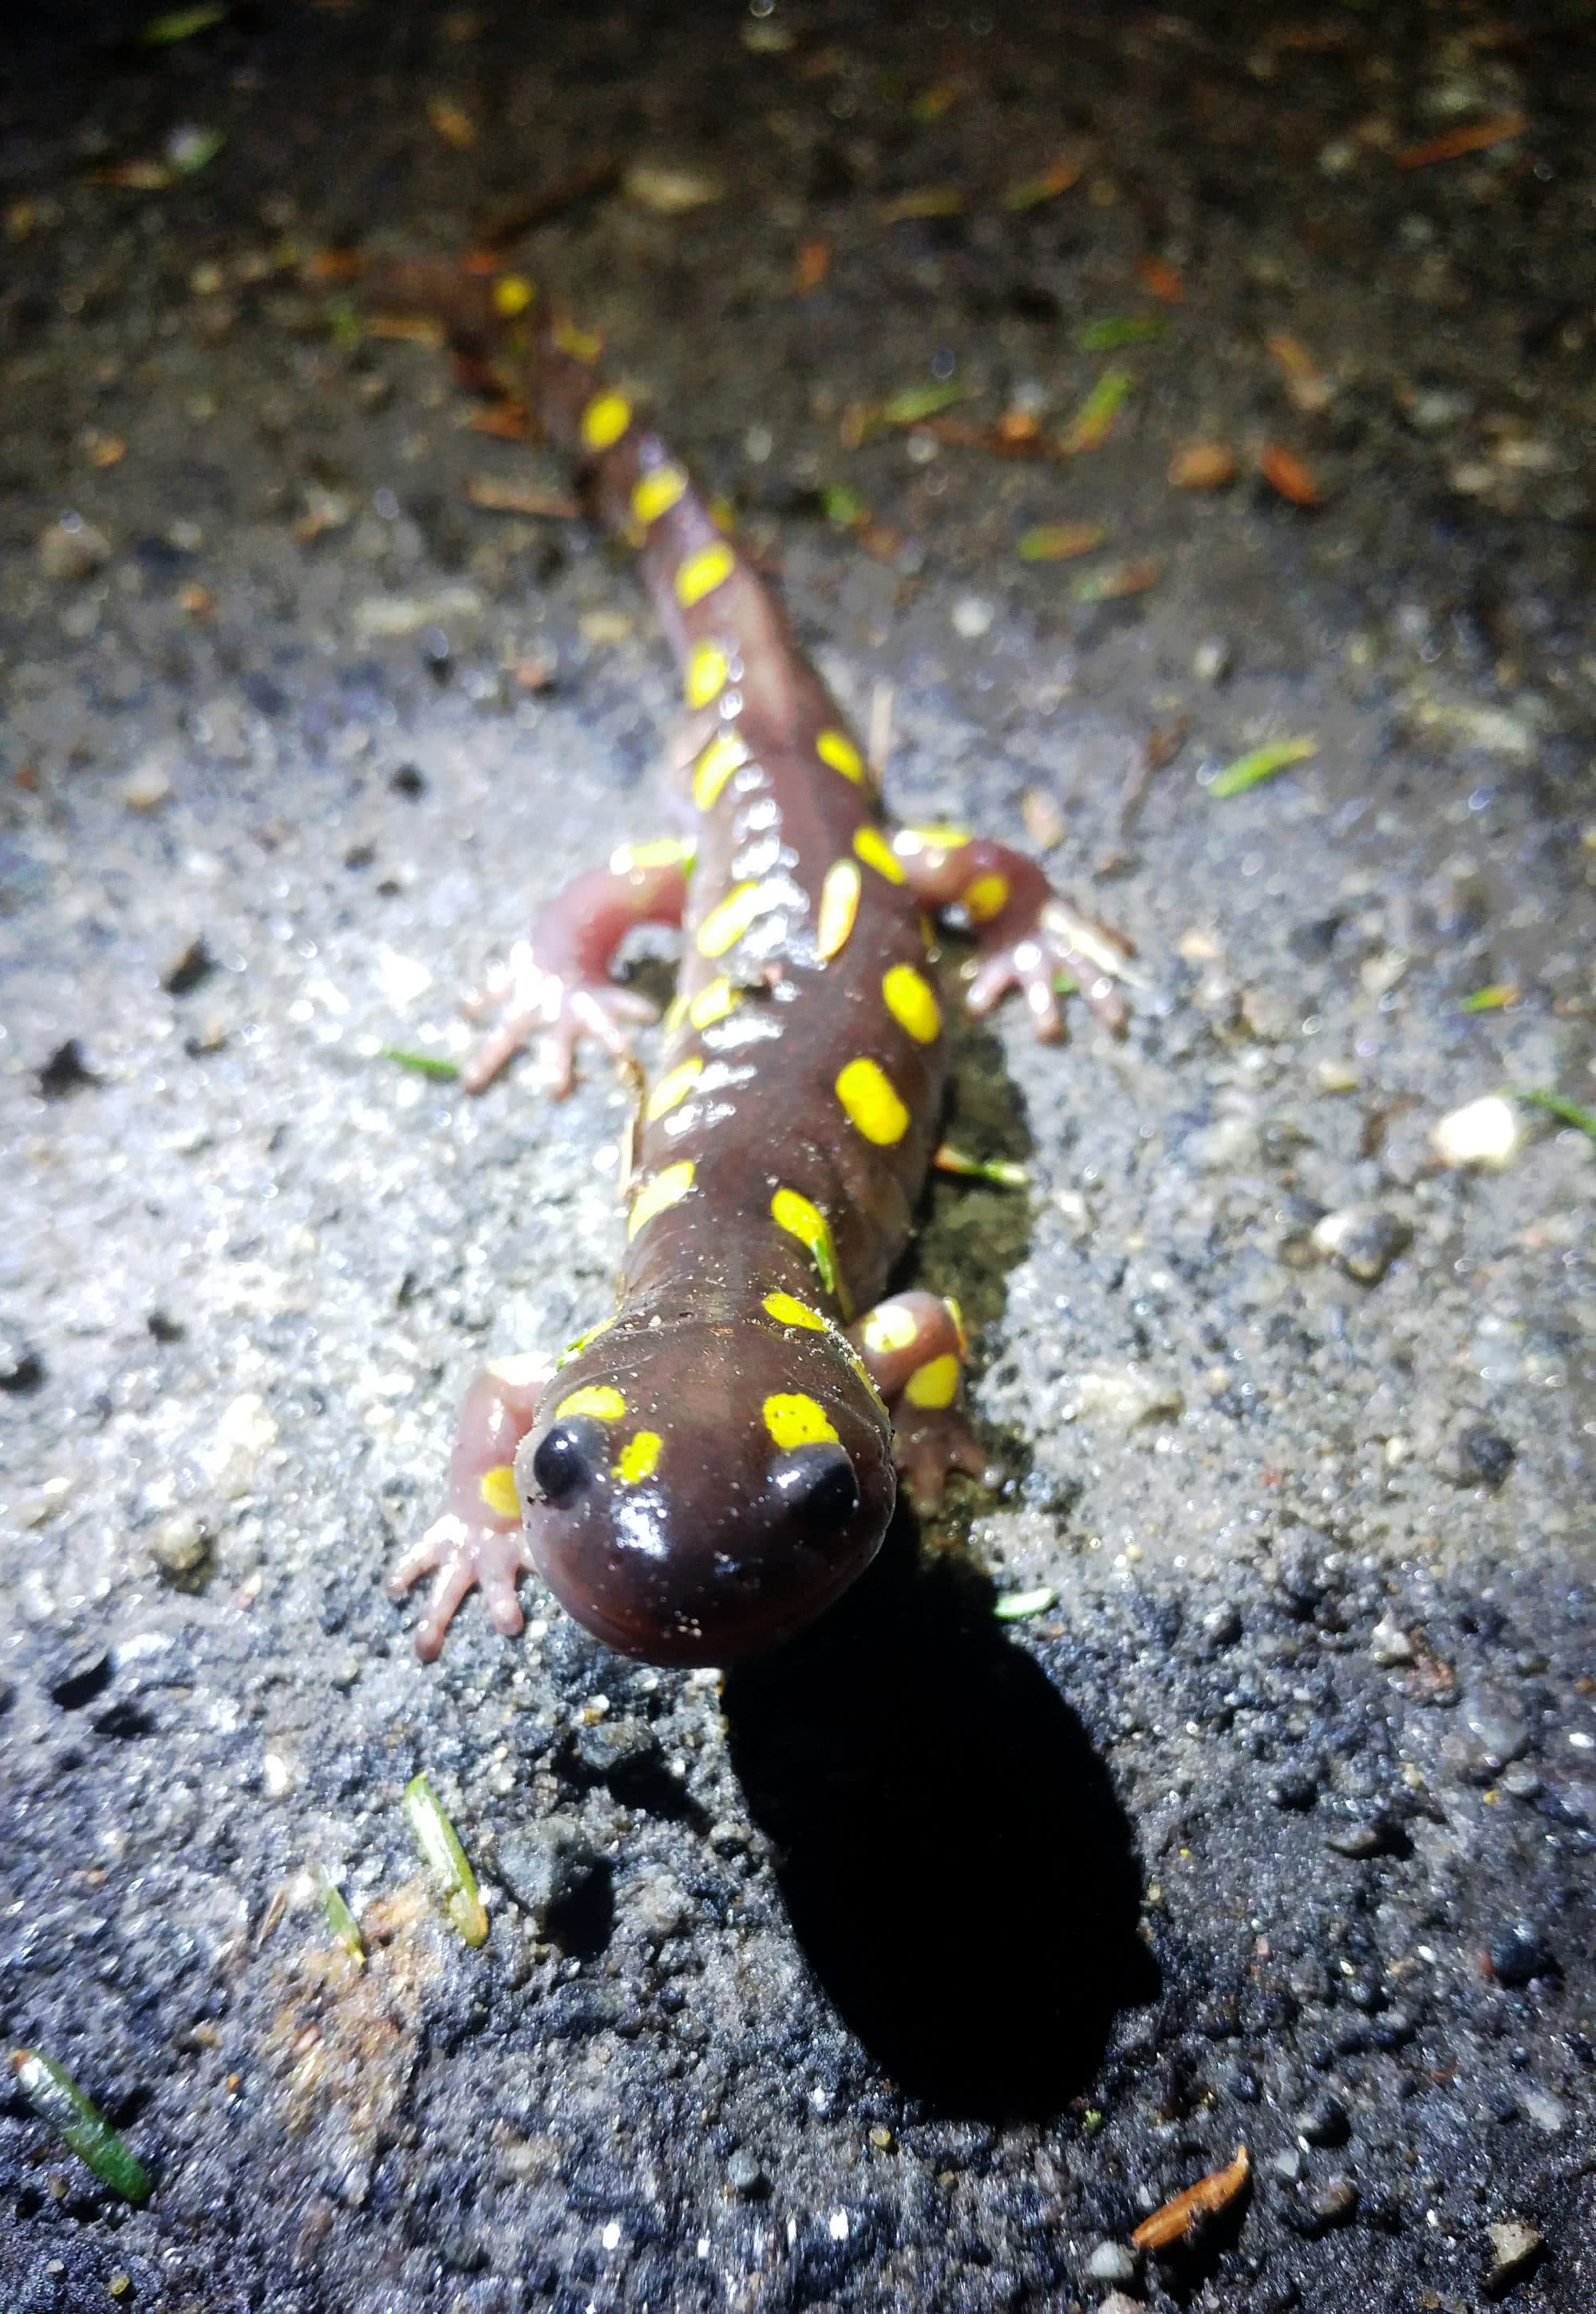 A spotted salamander smiles up from the road. (photo © Jenifer Dickinson)